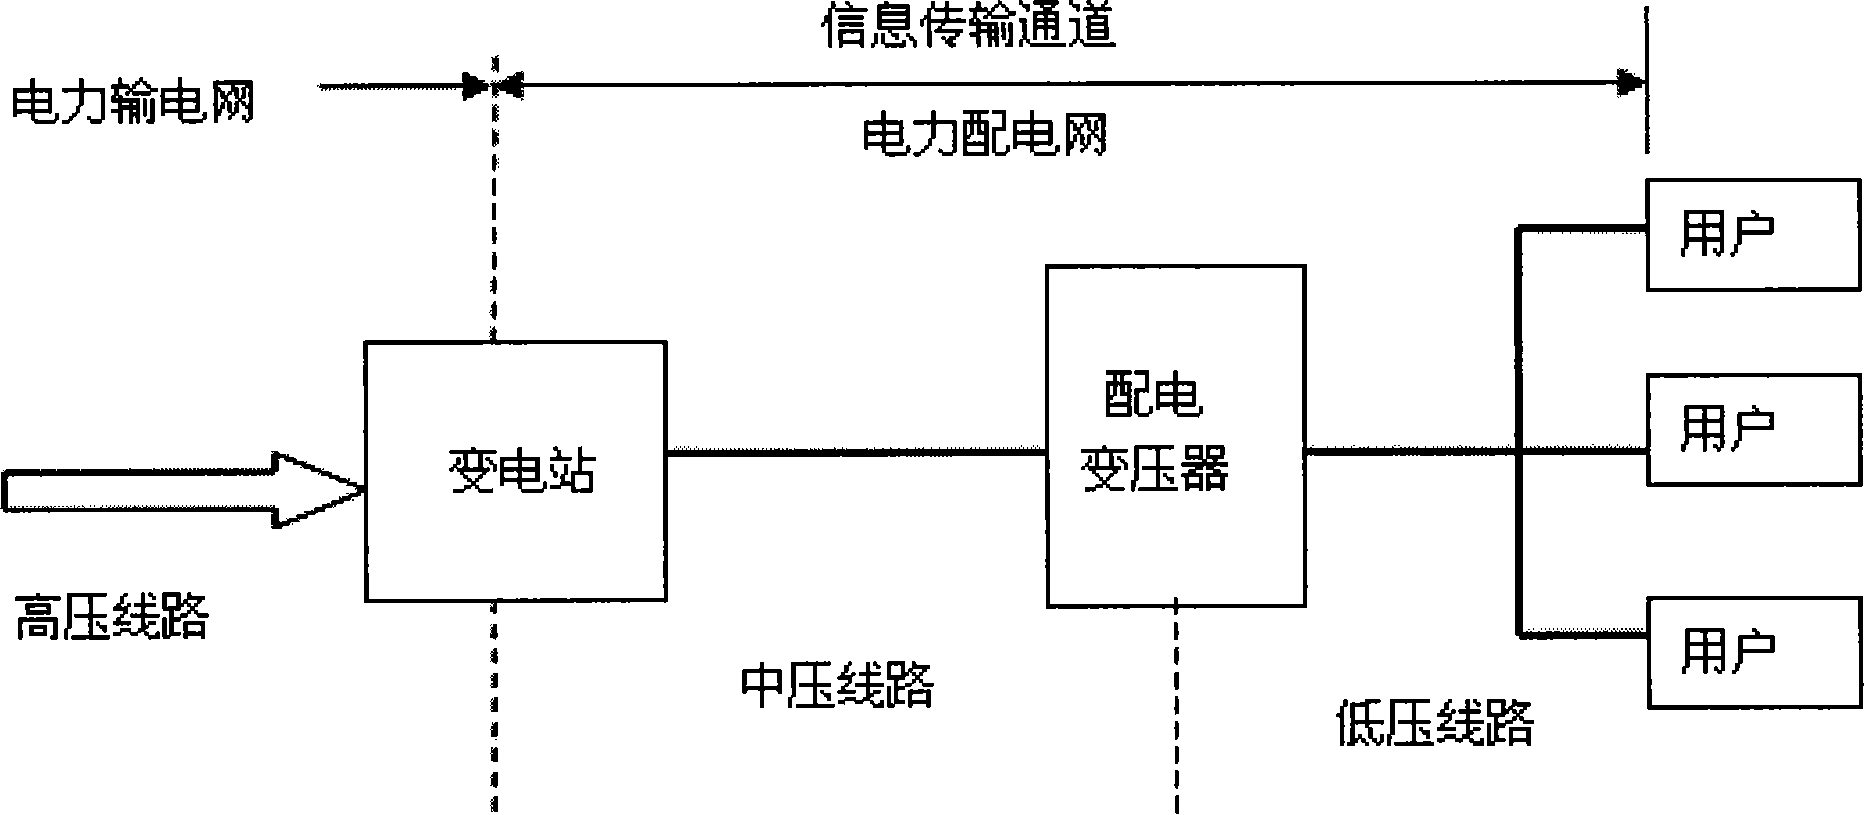 Power distribution network industrial frequency communicating method and system